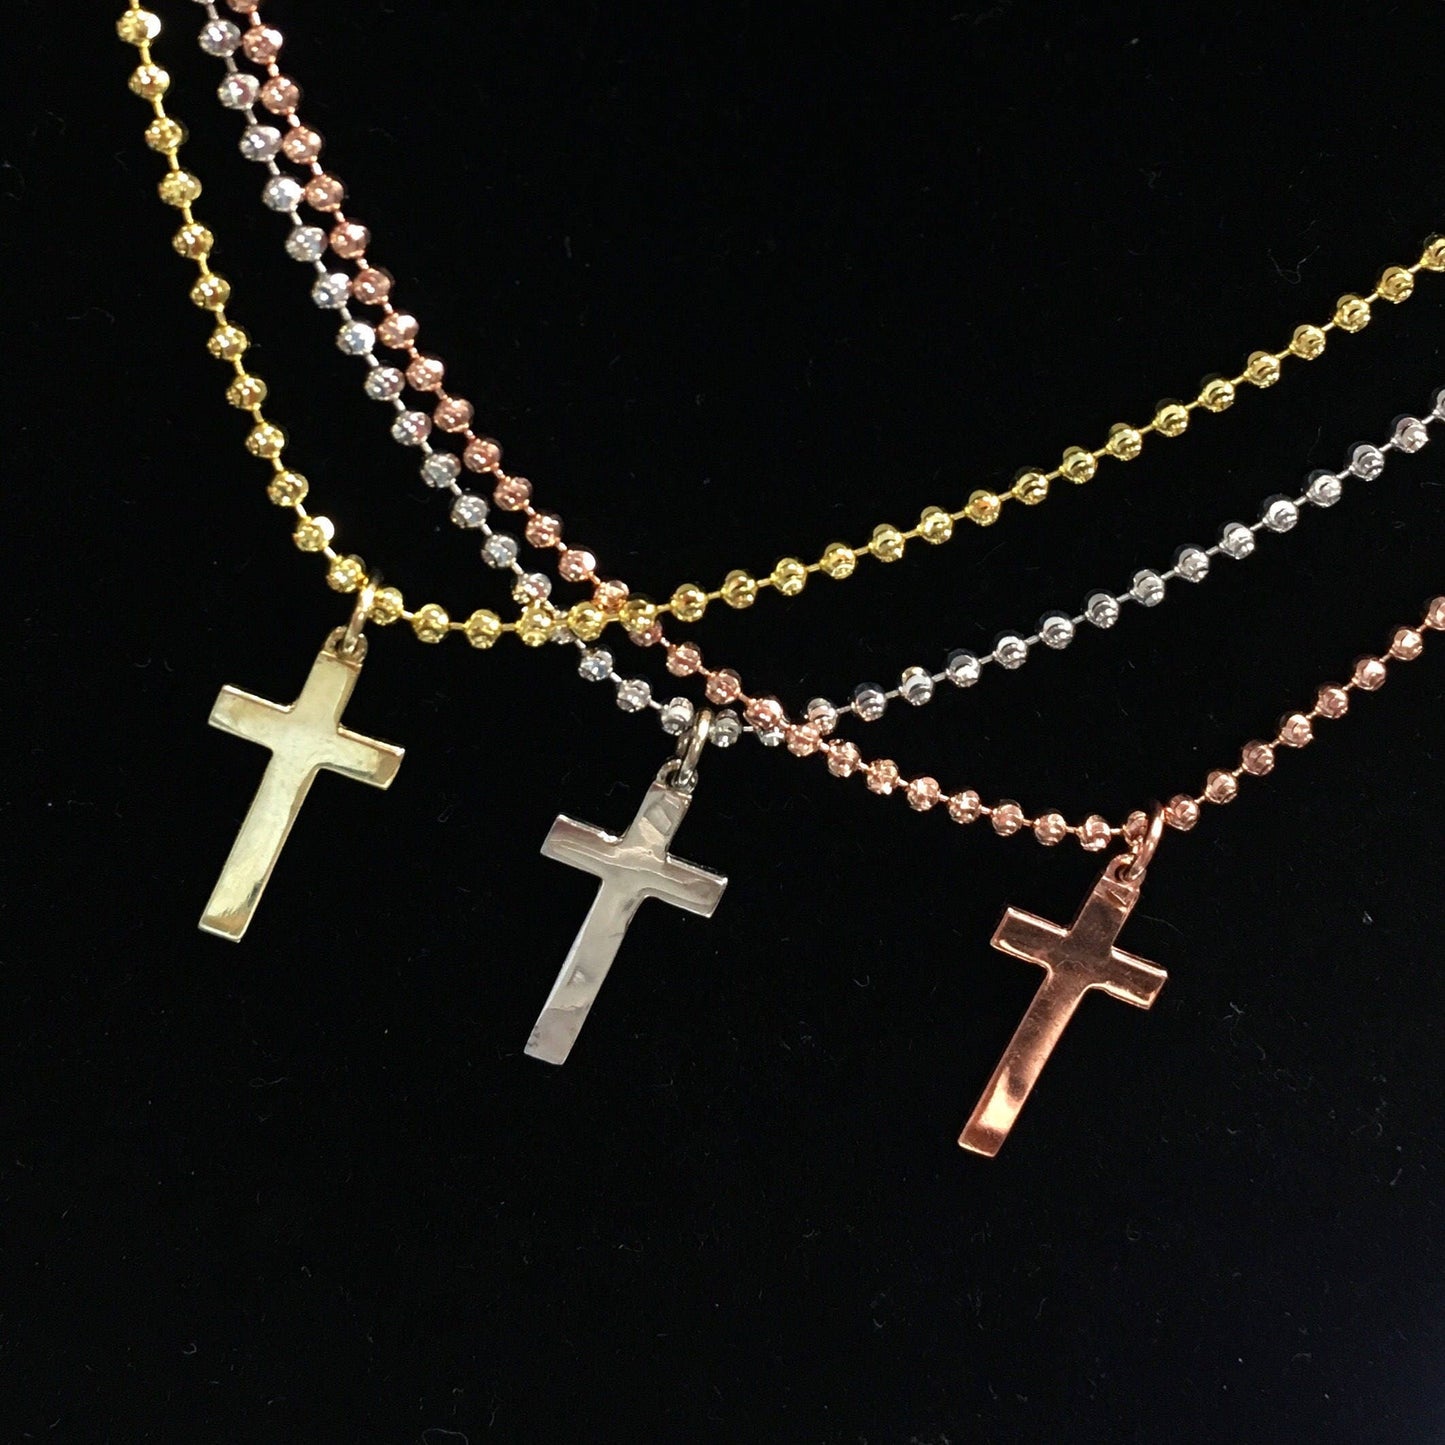 Cassie Choker with Classic Cross